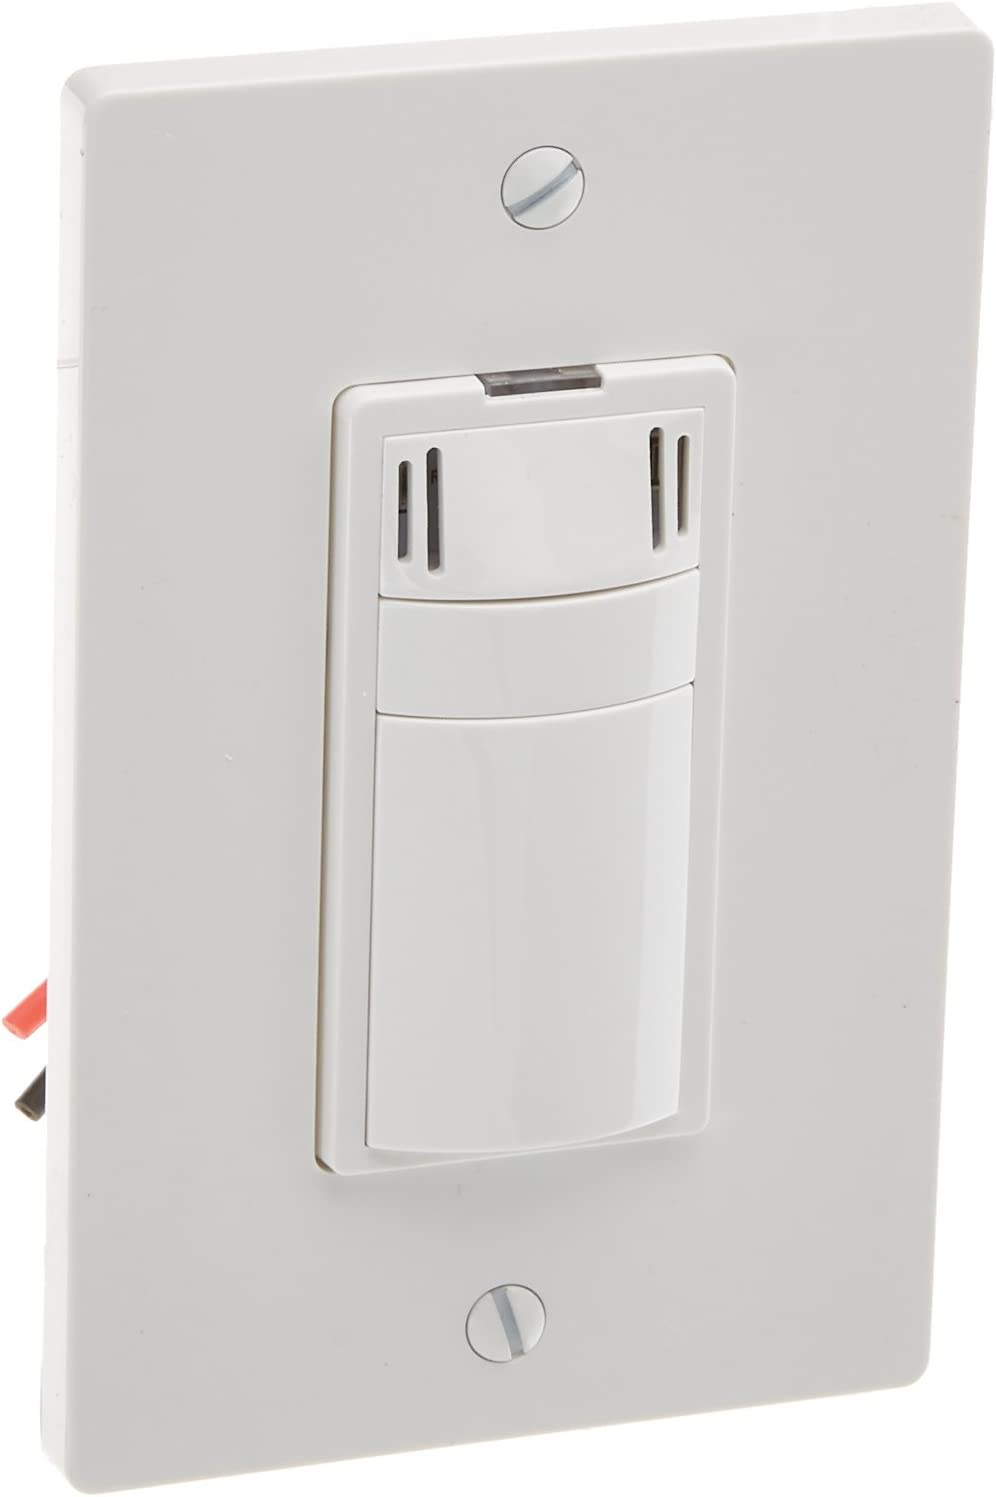 PANA FV-WCCS1-W WHISPER CONTROL CONDENSATION SENSOR HUMIDITY CONTROL AND COUNTDOWN TIMER ON/OFF WHITE